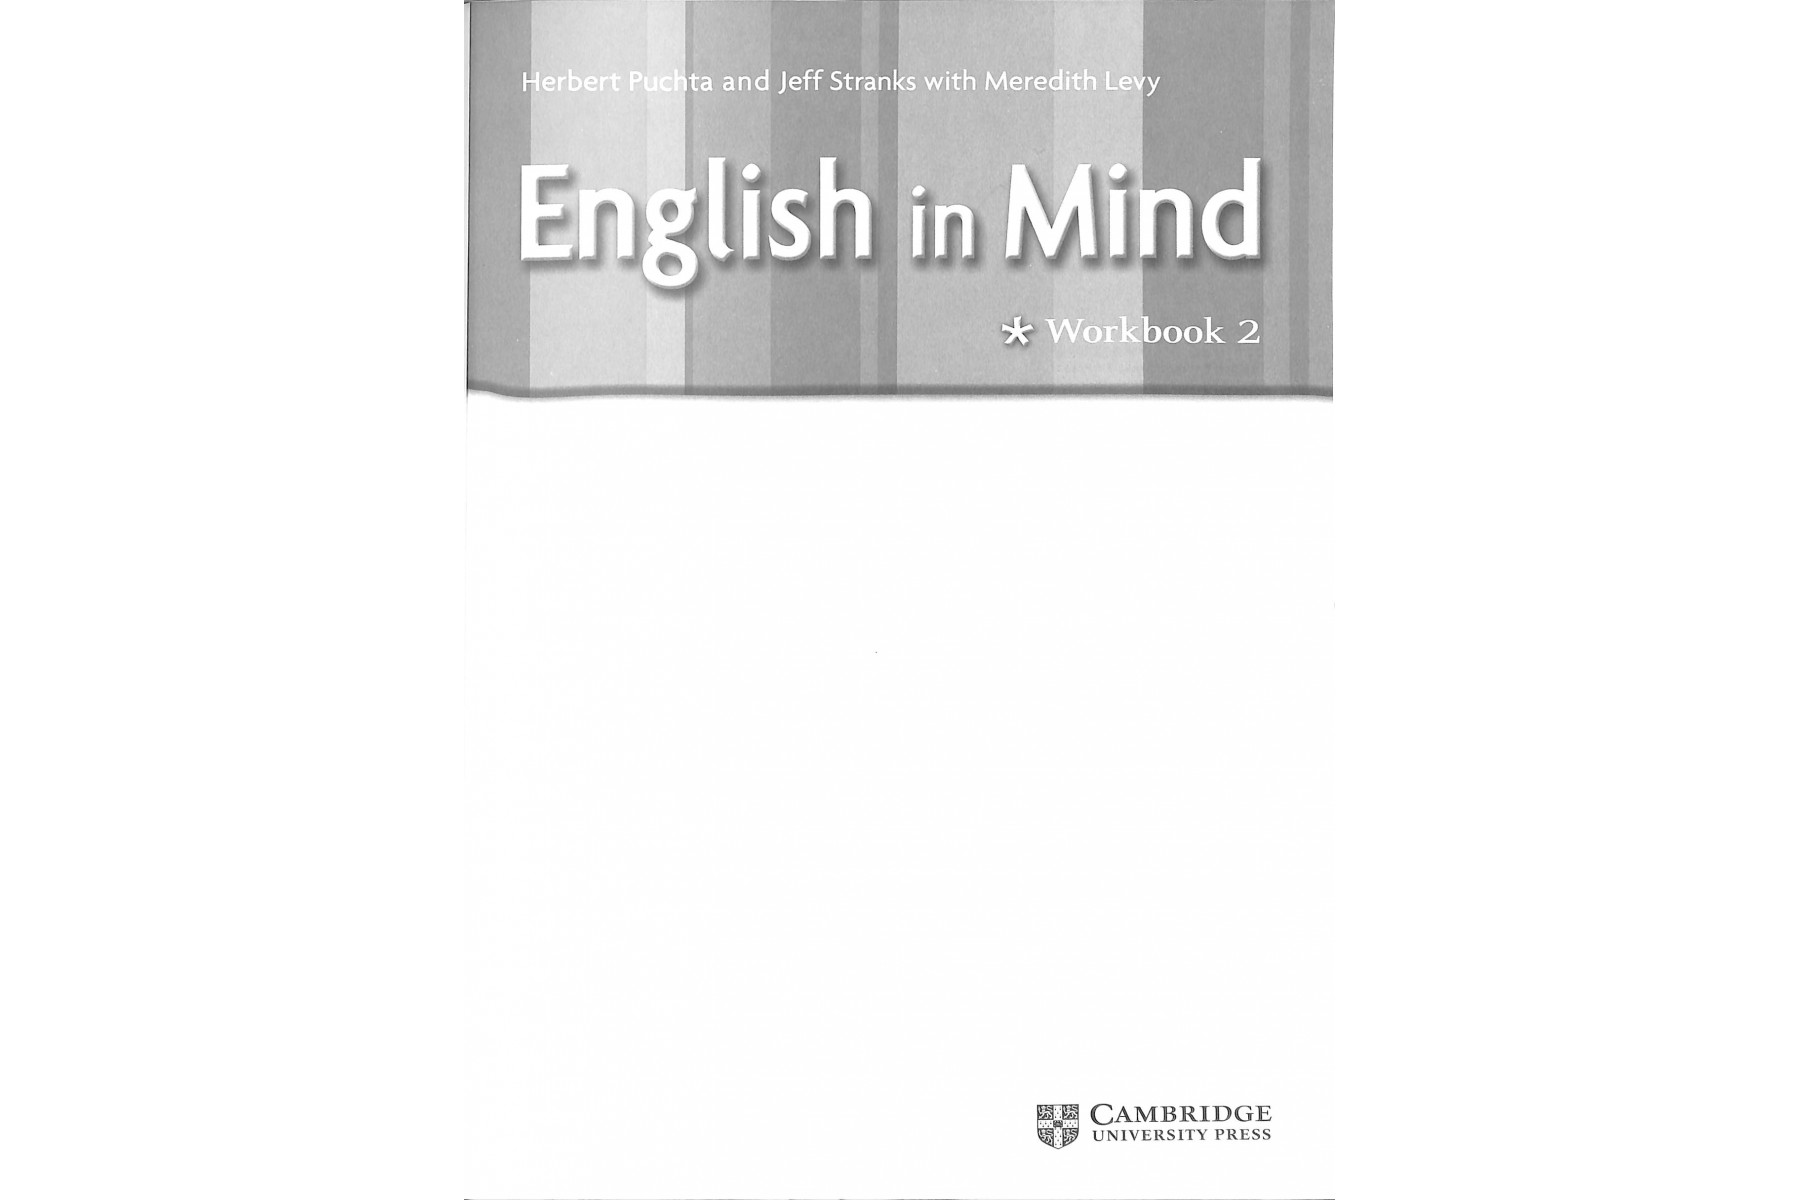 English in Mind 2 Workbook with Audio CD/CD-ROM